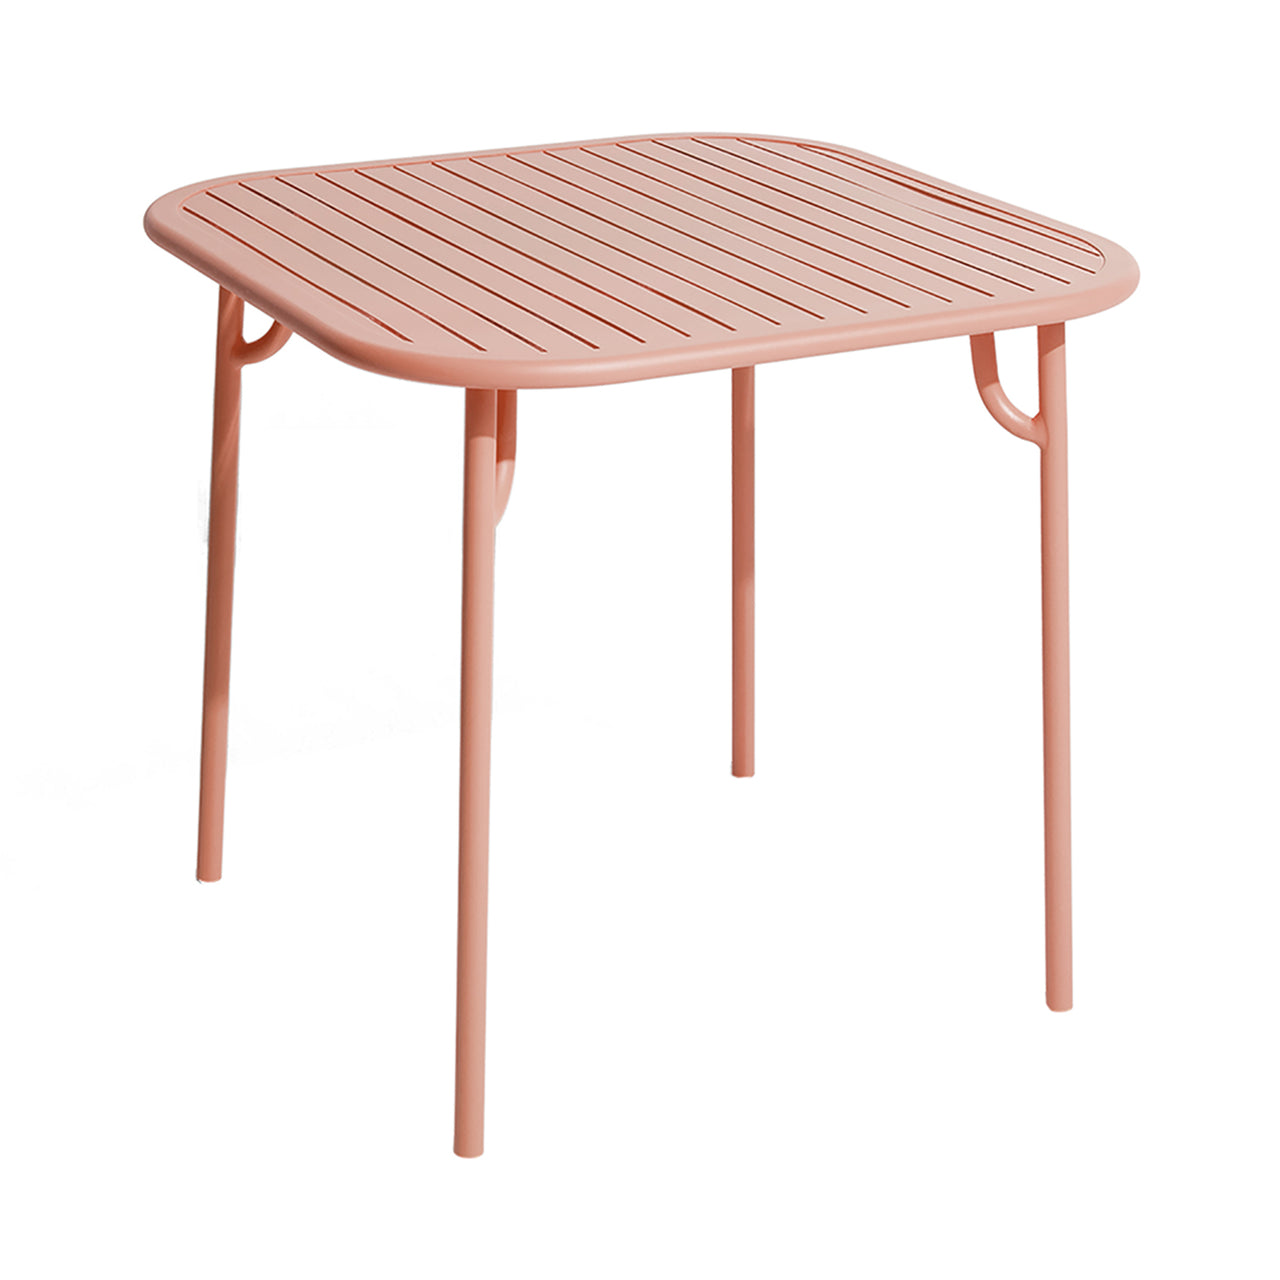 Week-End Square Dining Table with Slats: Blush